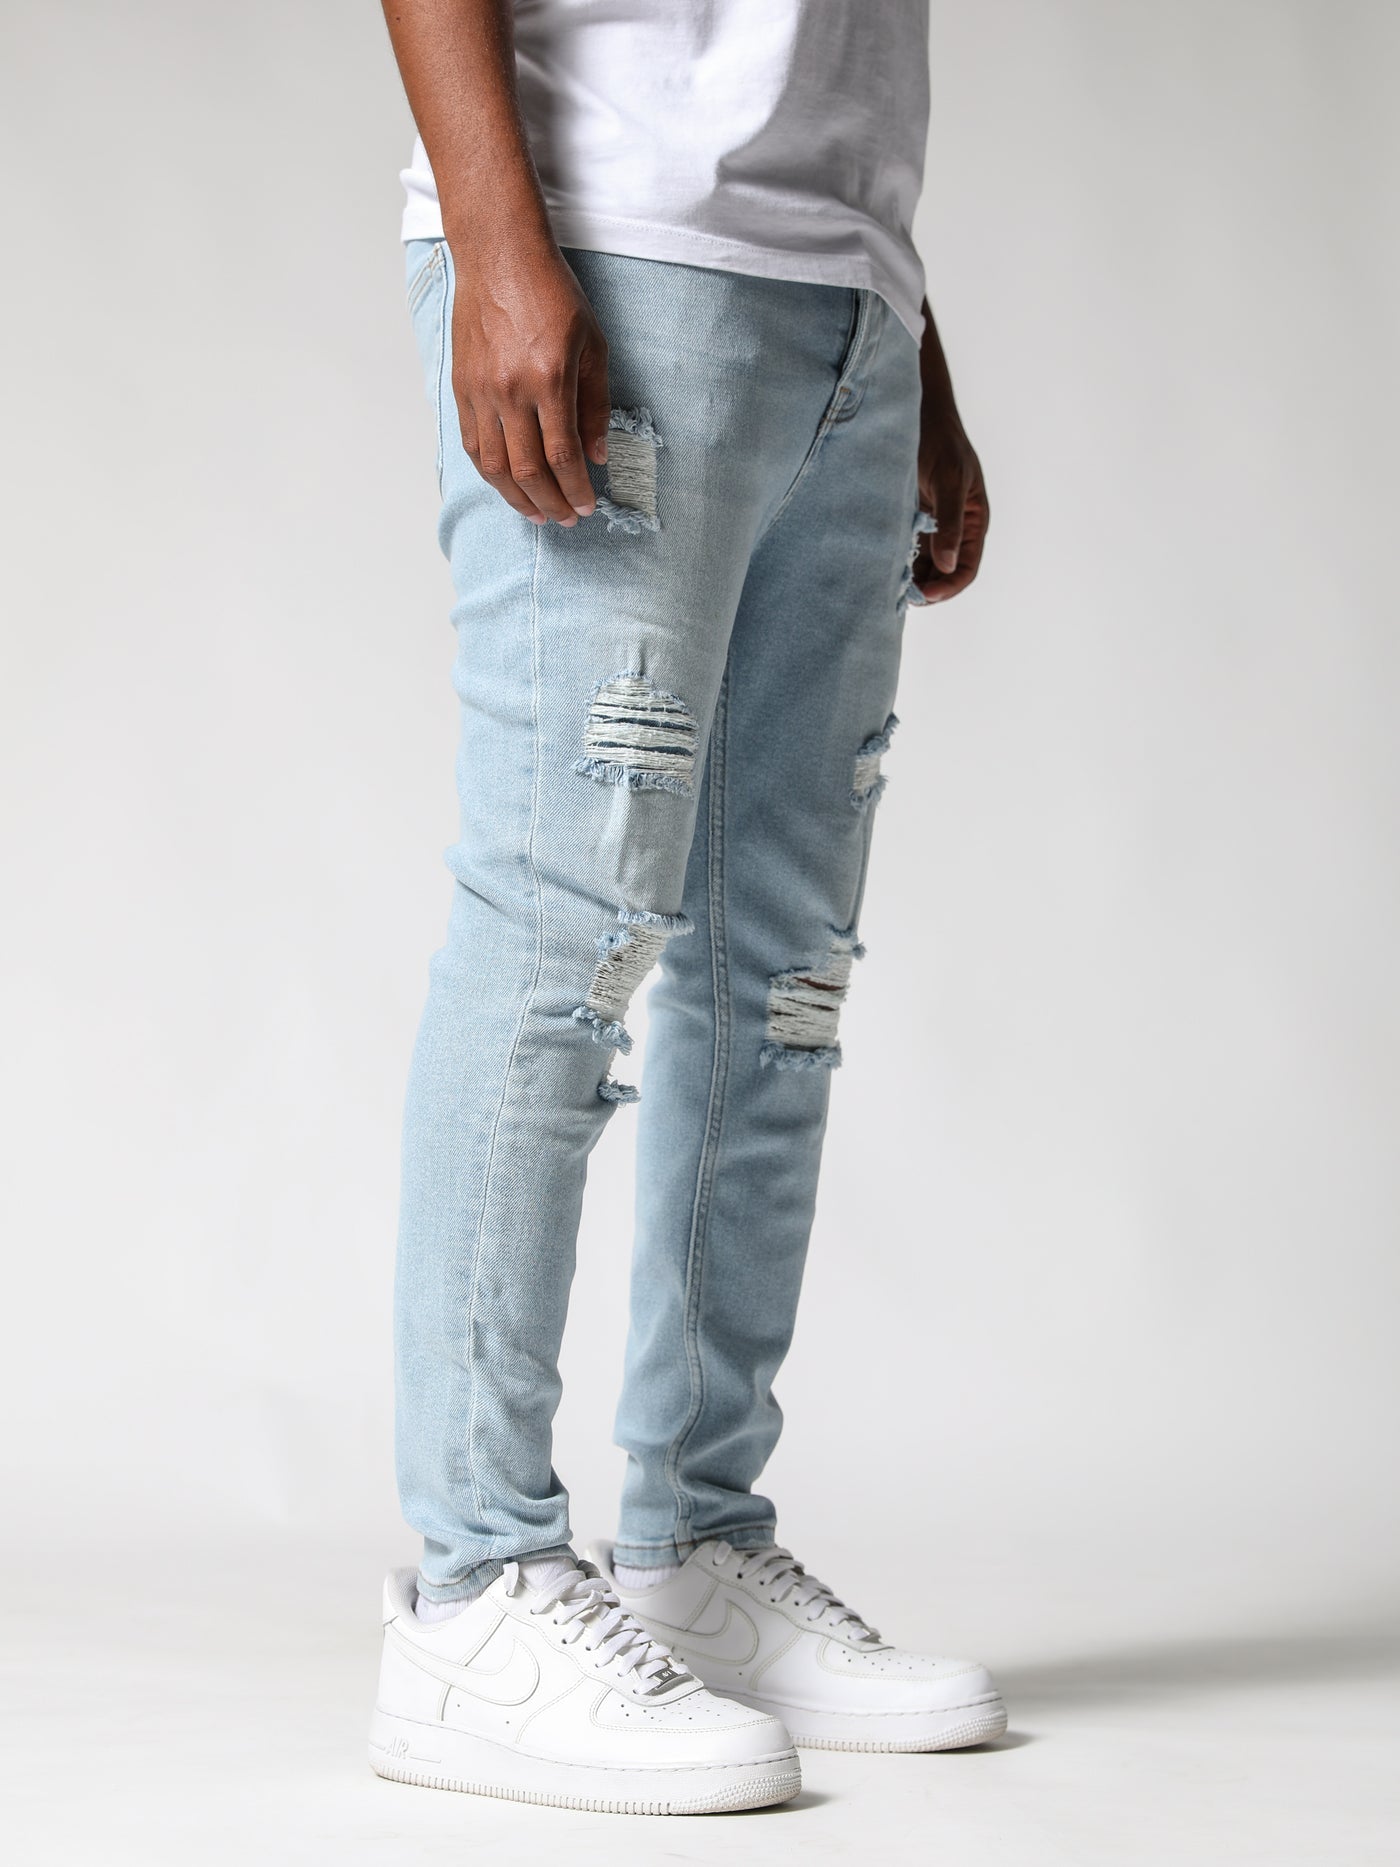 Premium Ice Blue Distressed Jeans - UNEFFECTED STUDIOS® - JEANS - UNEFFECTED STUDIOS®